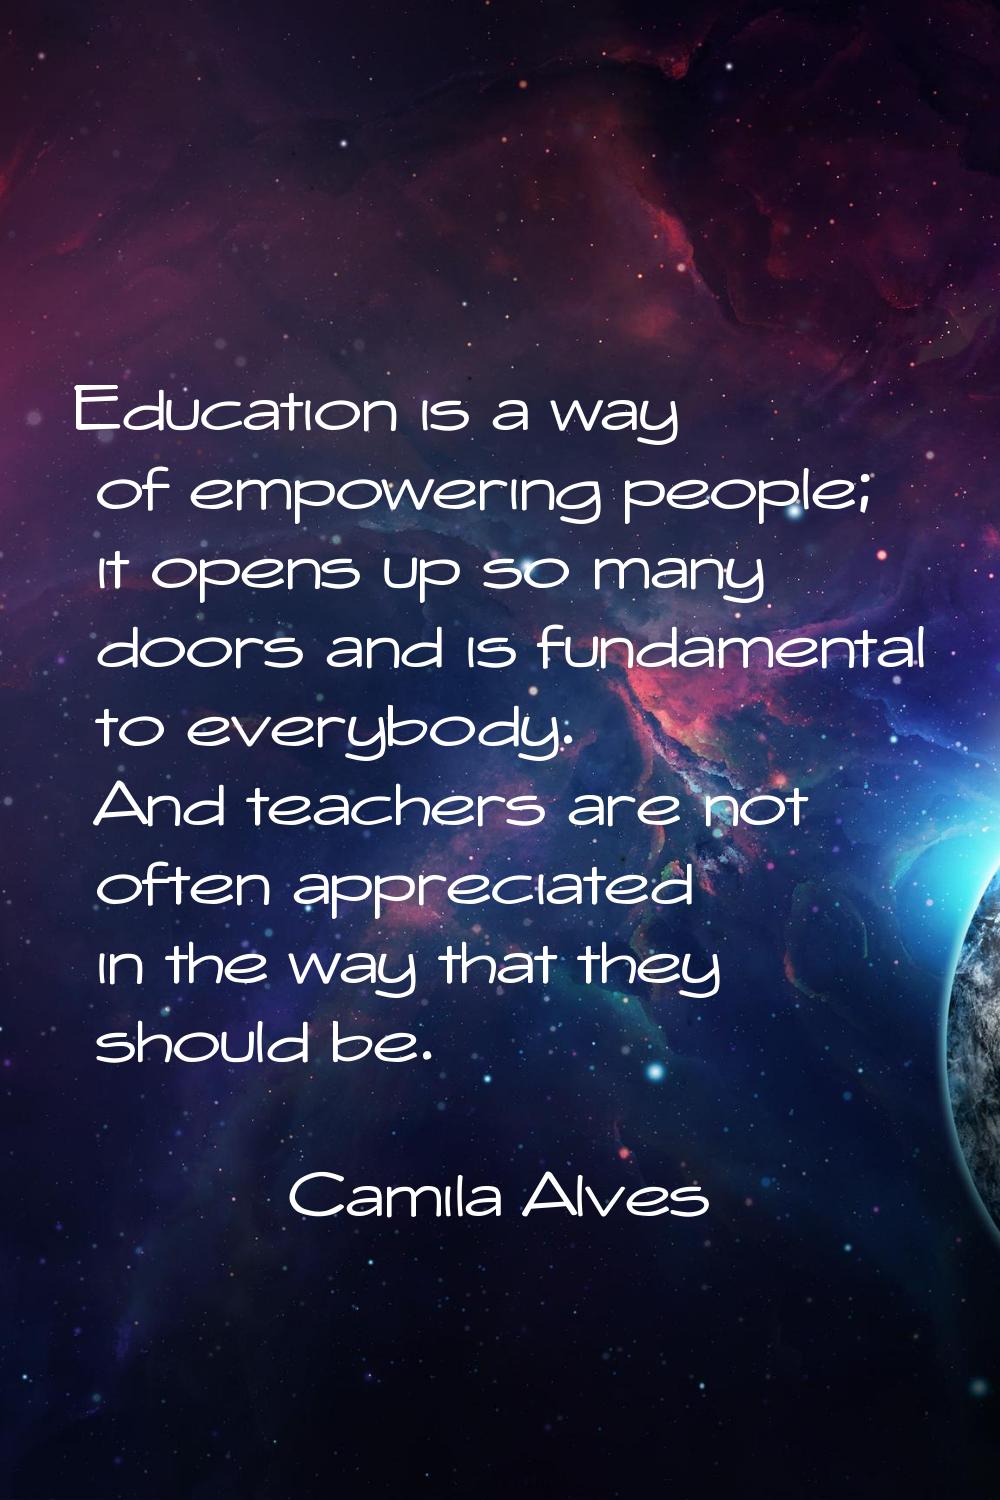 Education is a way of empowering people; it opens up so many doors and is fundamental to everybody.